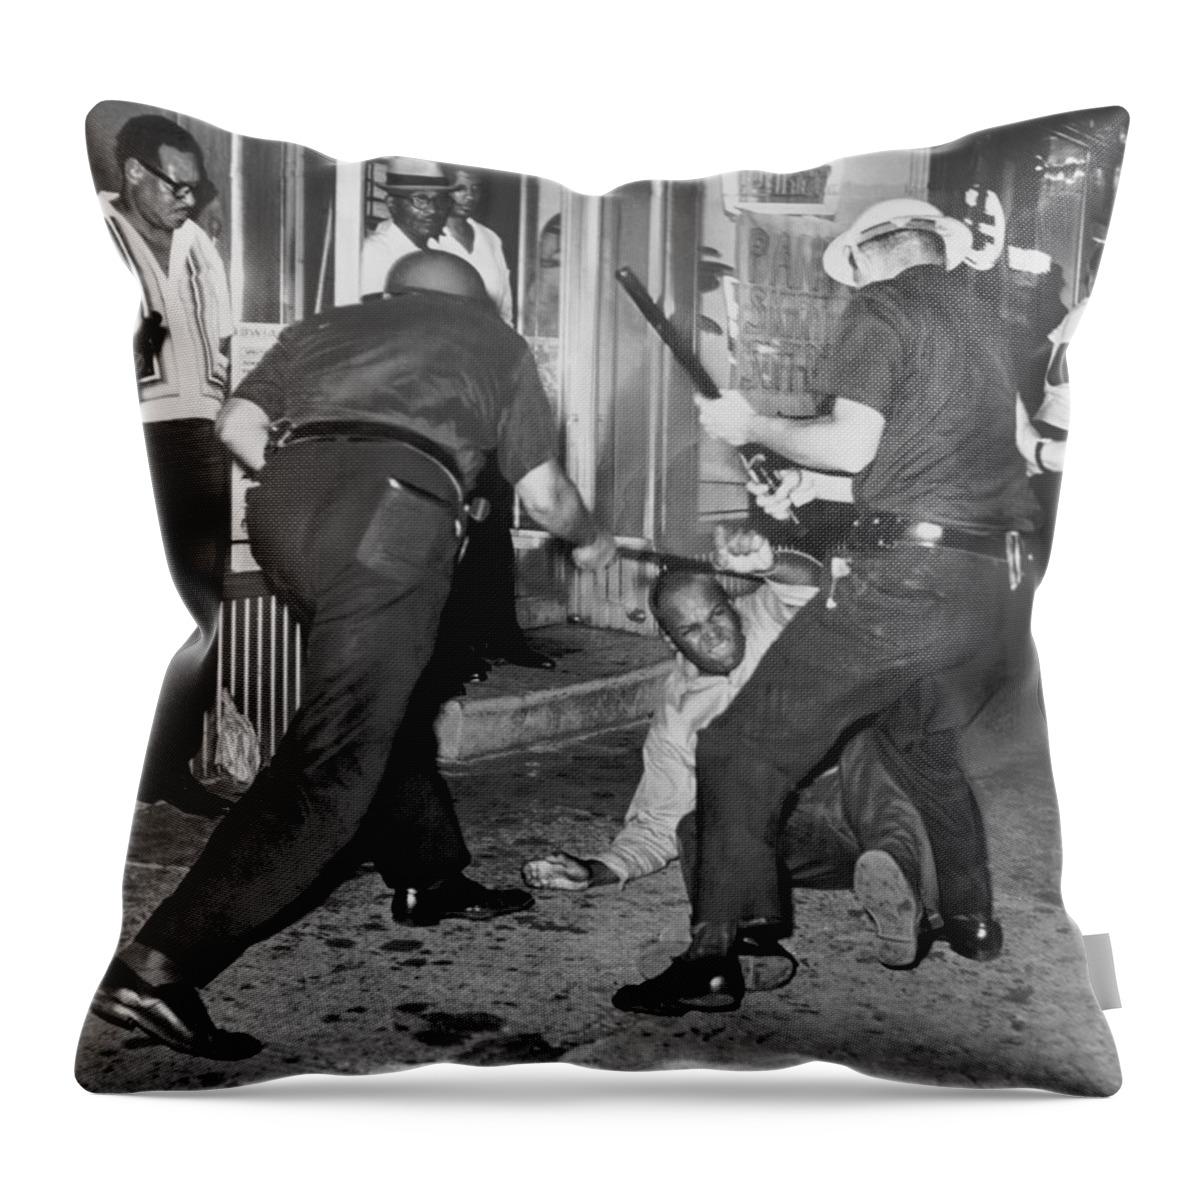 1964 Throw Pillow featuring the photograph Protester Clubbed In Harlem by Underwood Archives